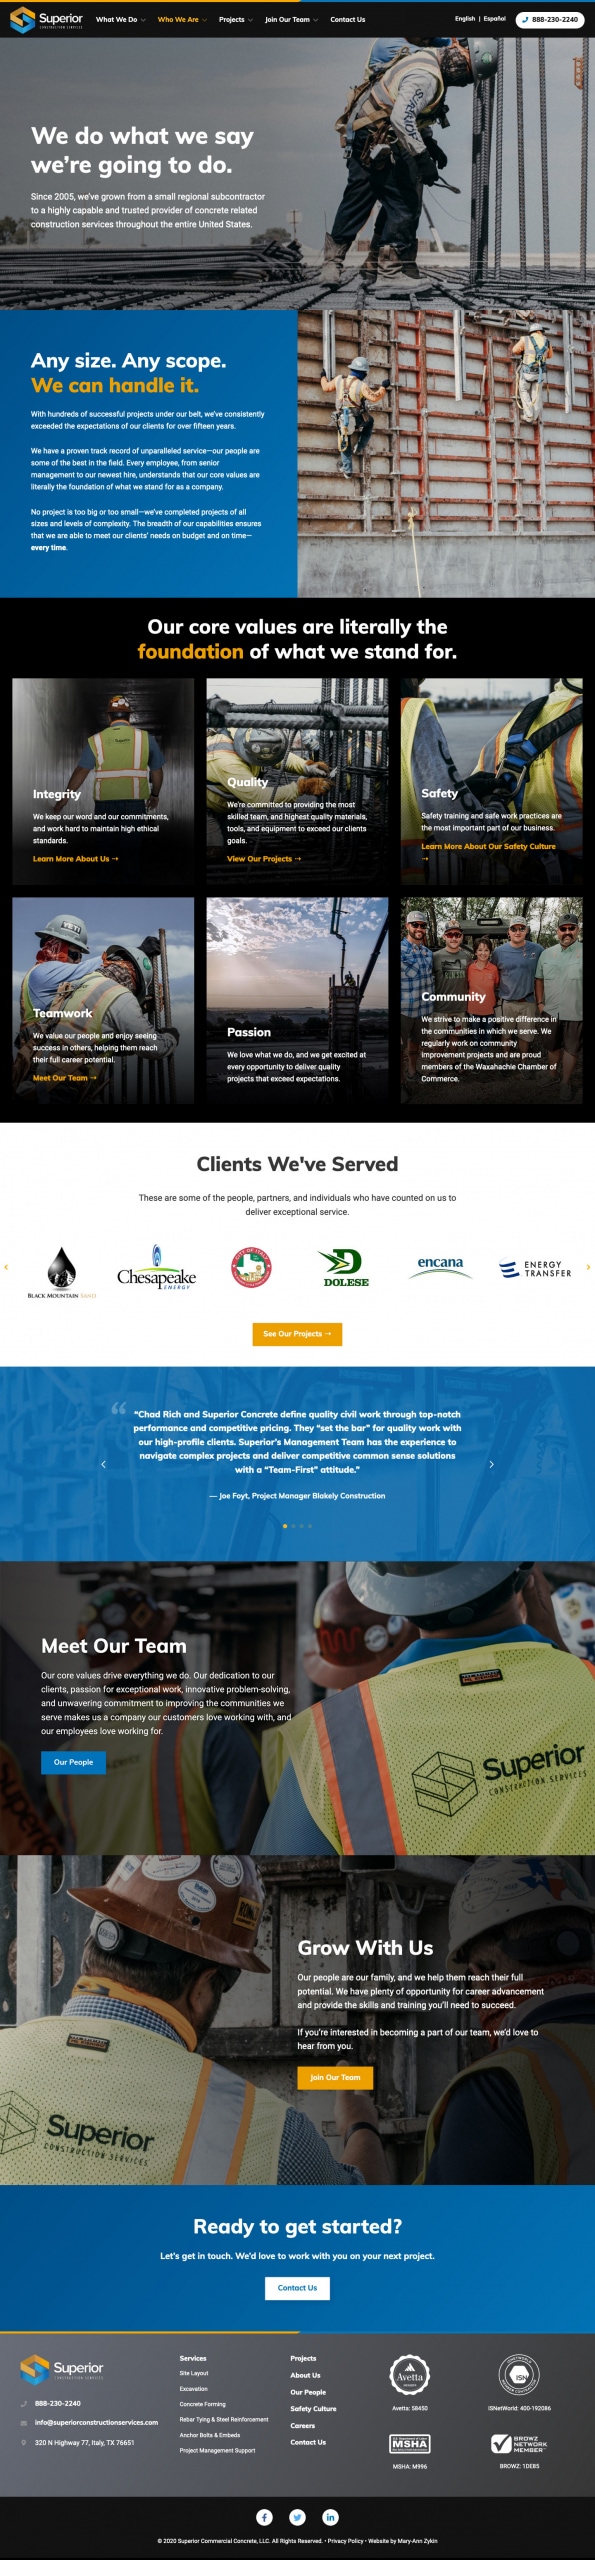 Superior Construction Services About Page